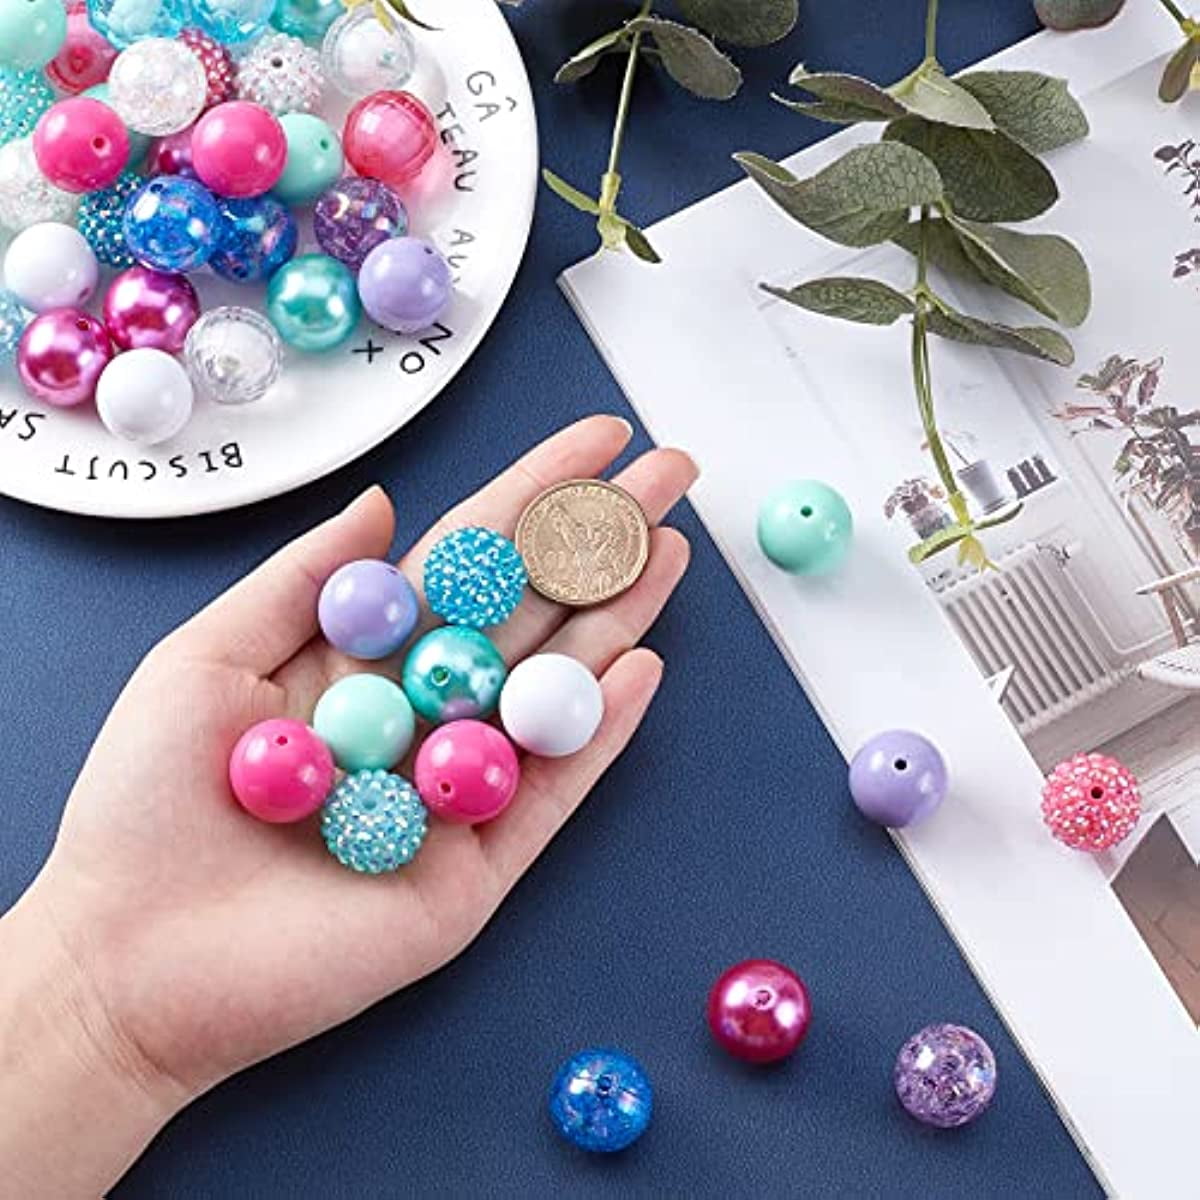 50pcs 20mm Bubblegum Beads Chunk Pen Beads Acrylic Focal Beads Large Loose  Beads Mixed Color Round Beads for Pen Wedding Garland Jewelry Bracelet  Necklace Bag Chain Making 